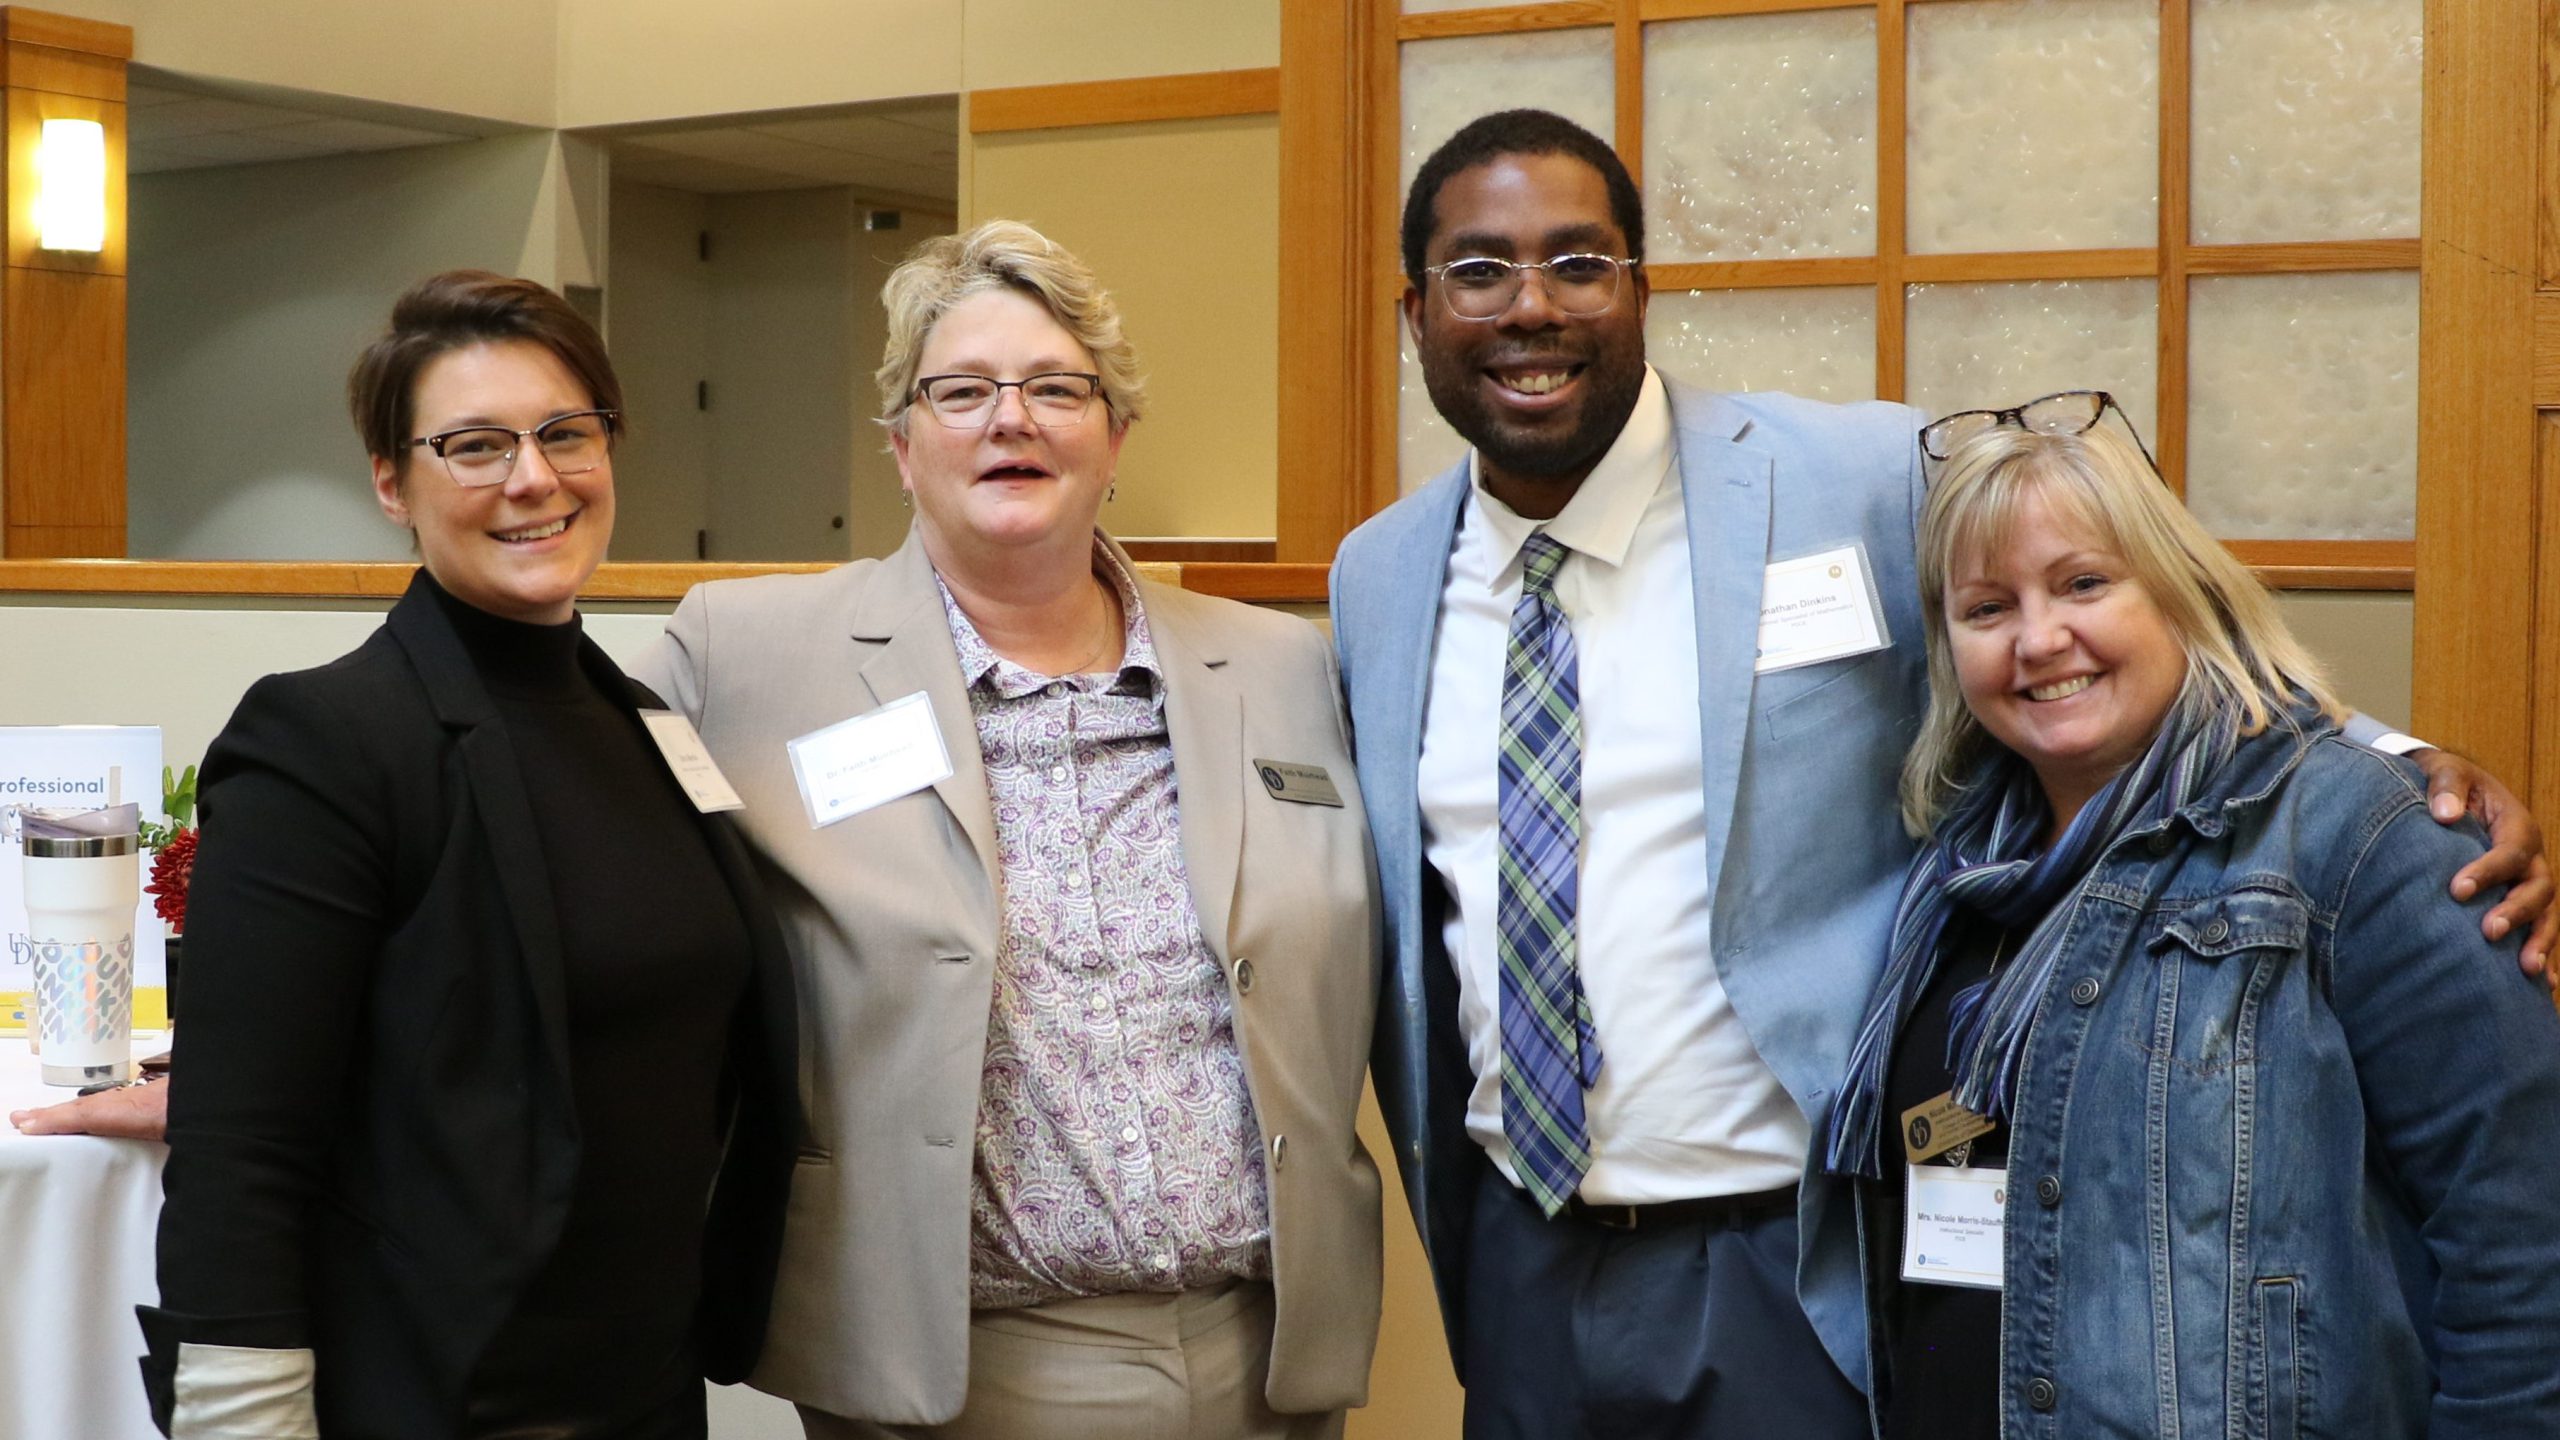 Faith Muirhead with attendees at the University of Delaware School Success Center launch event.